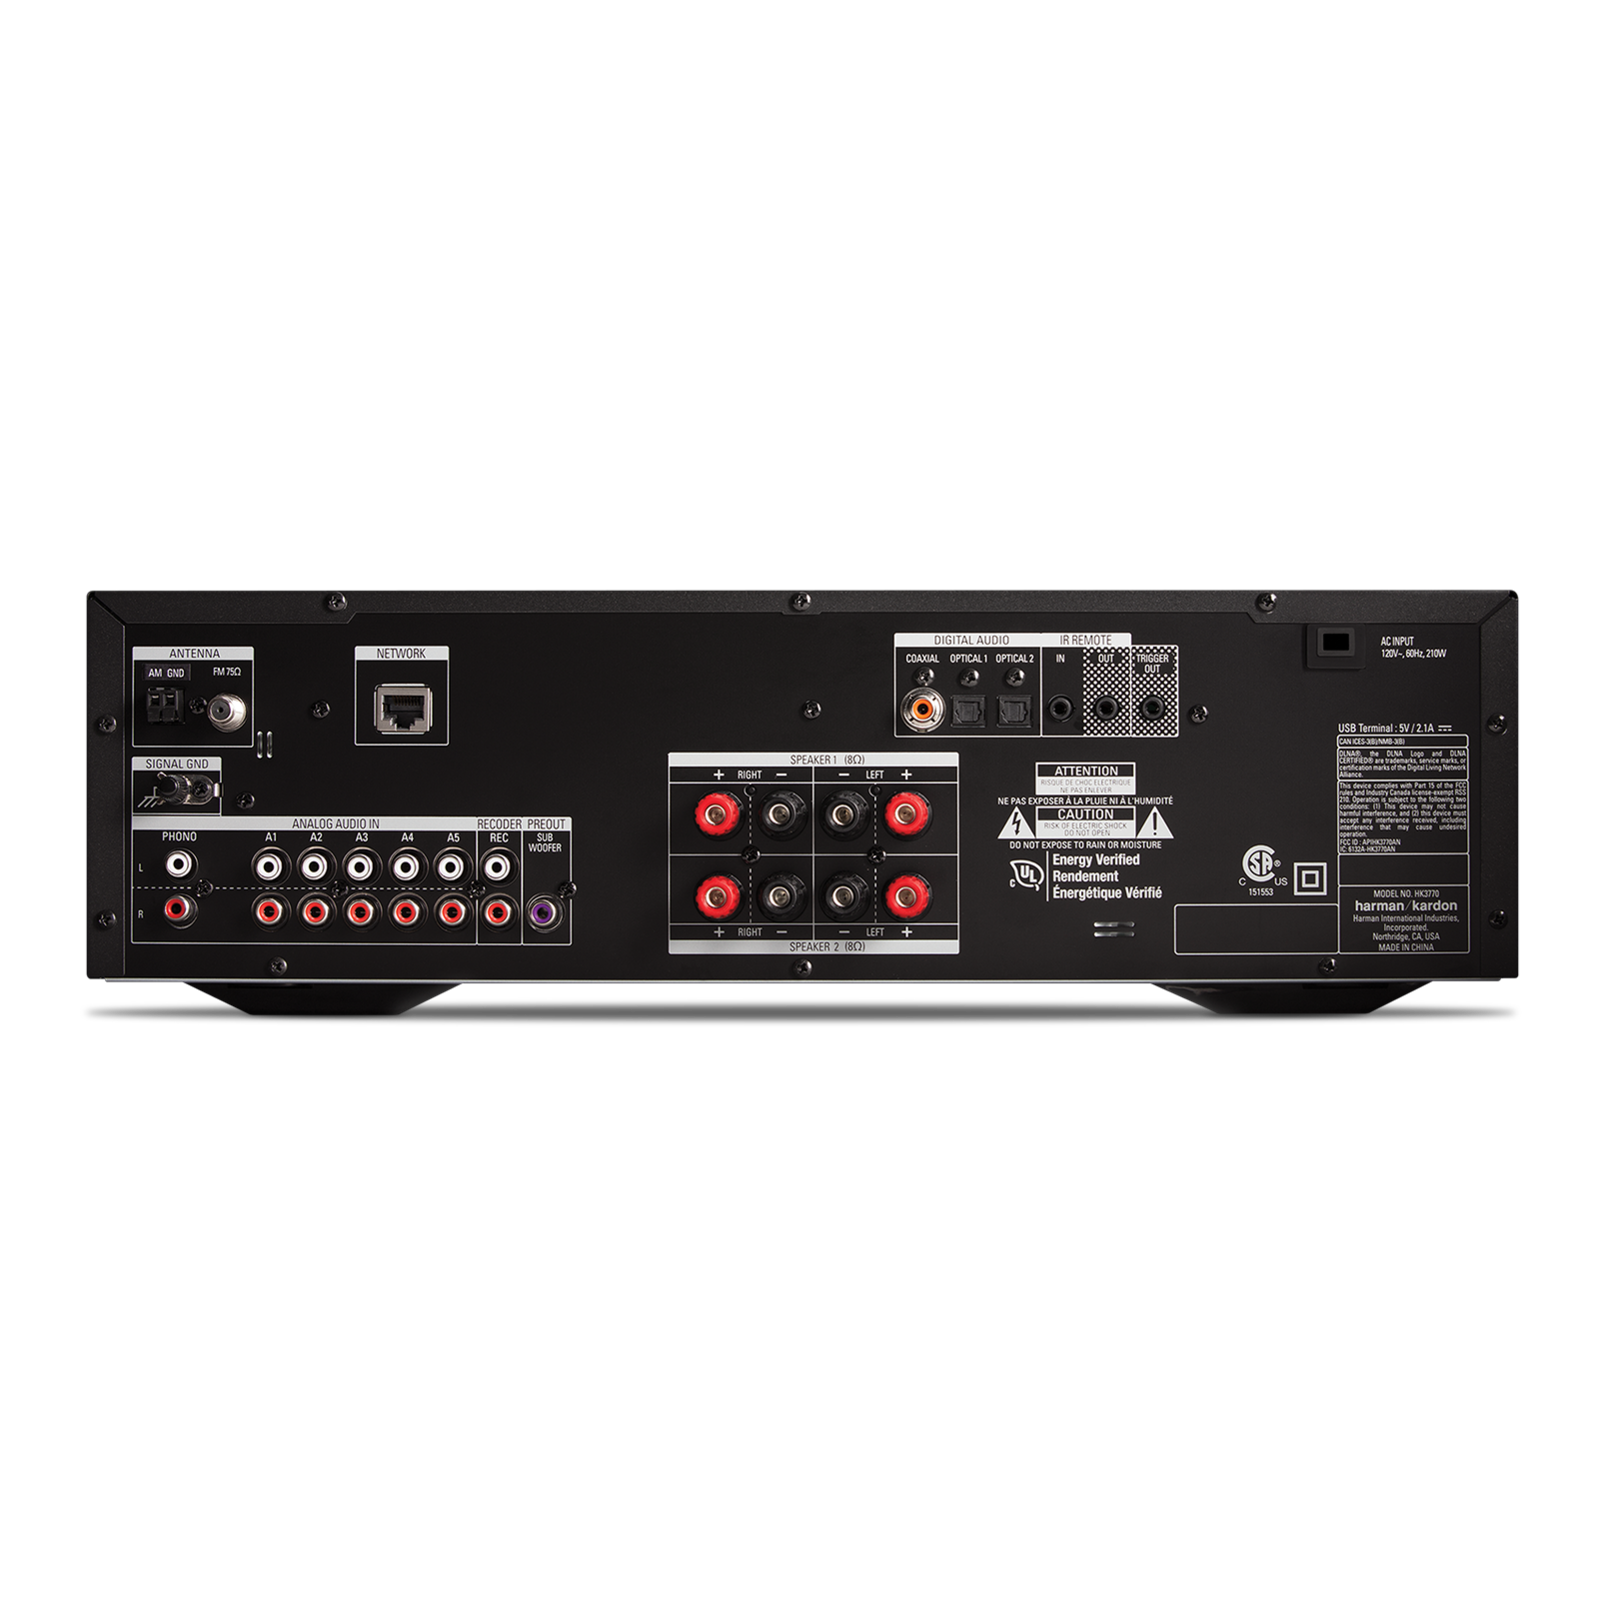 HK 3770 - Black - 240 watt stereo receiver with network connectivity - Back